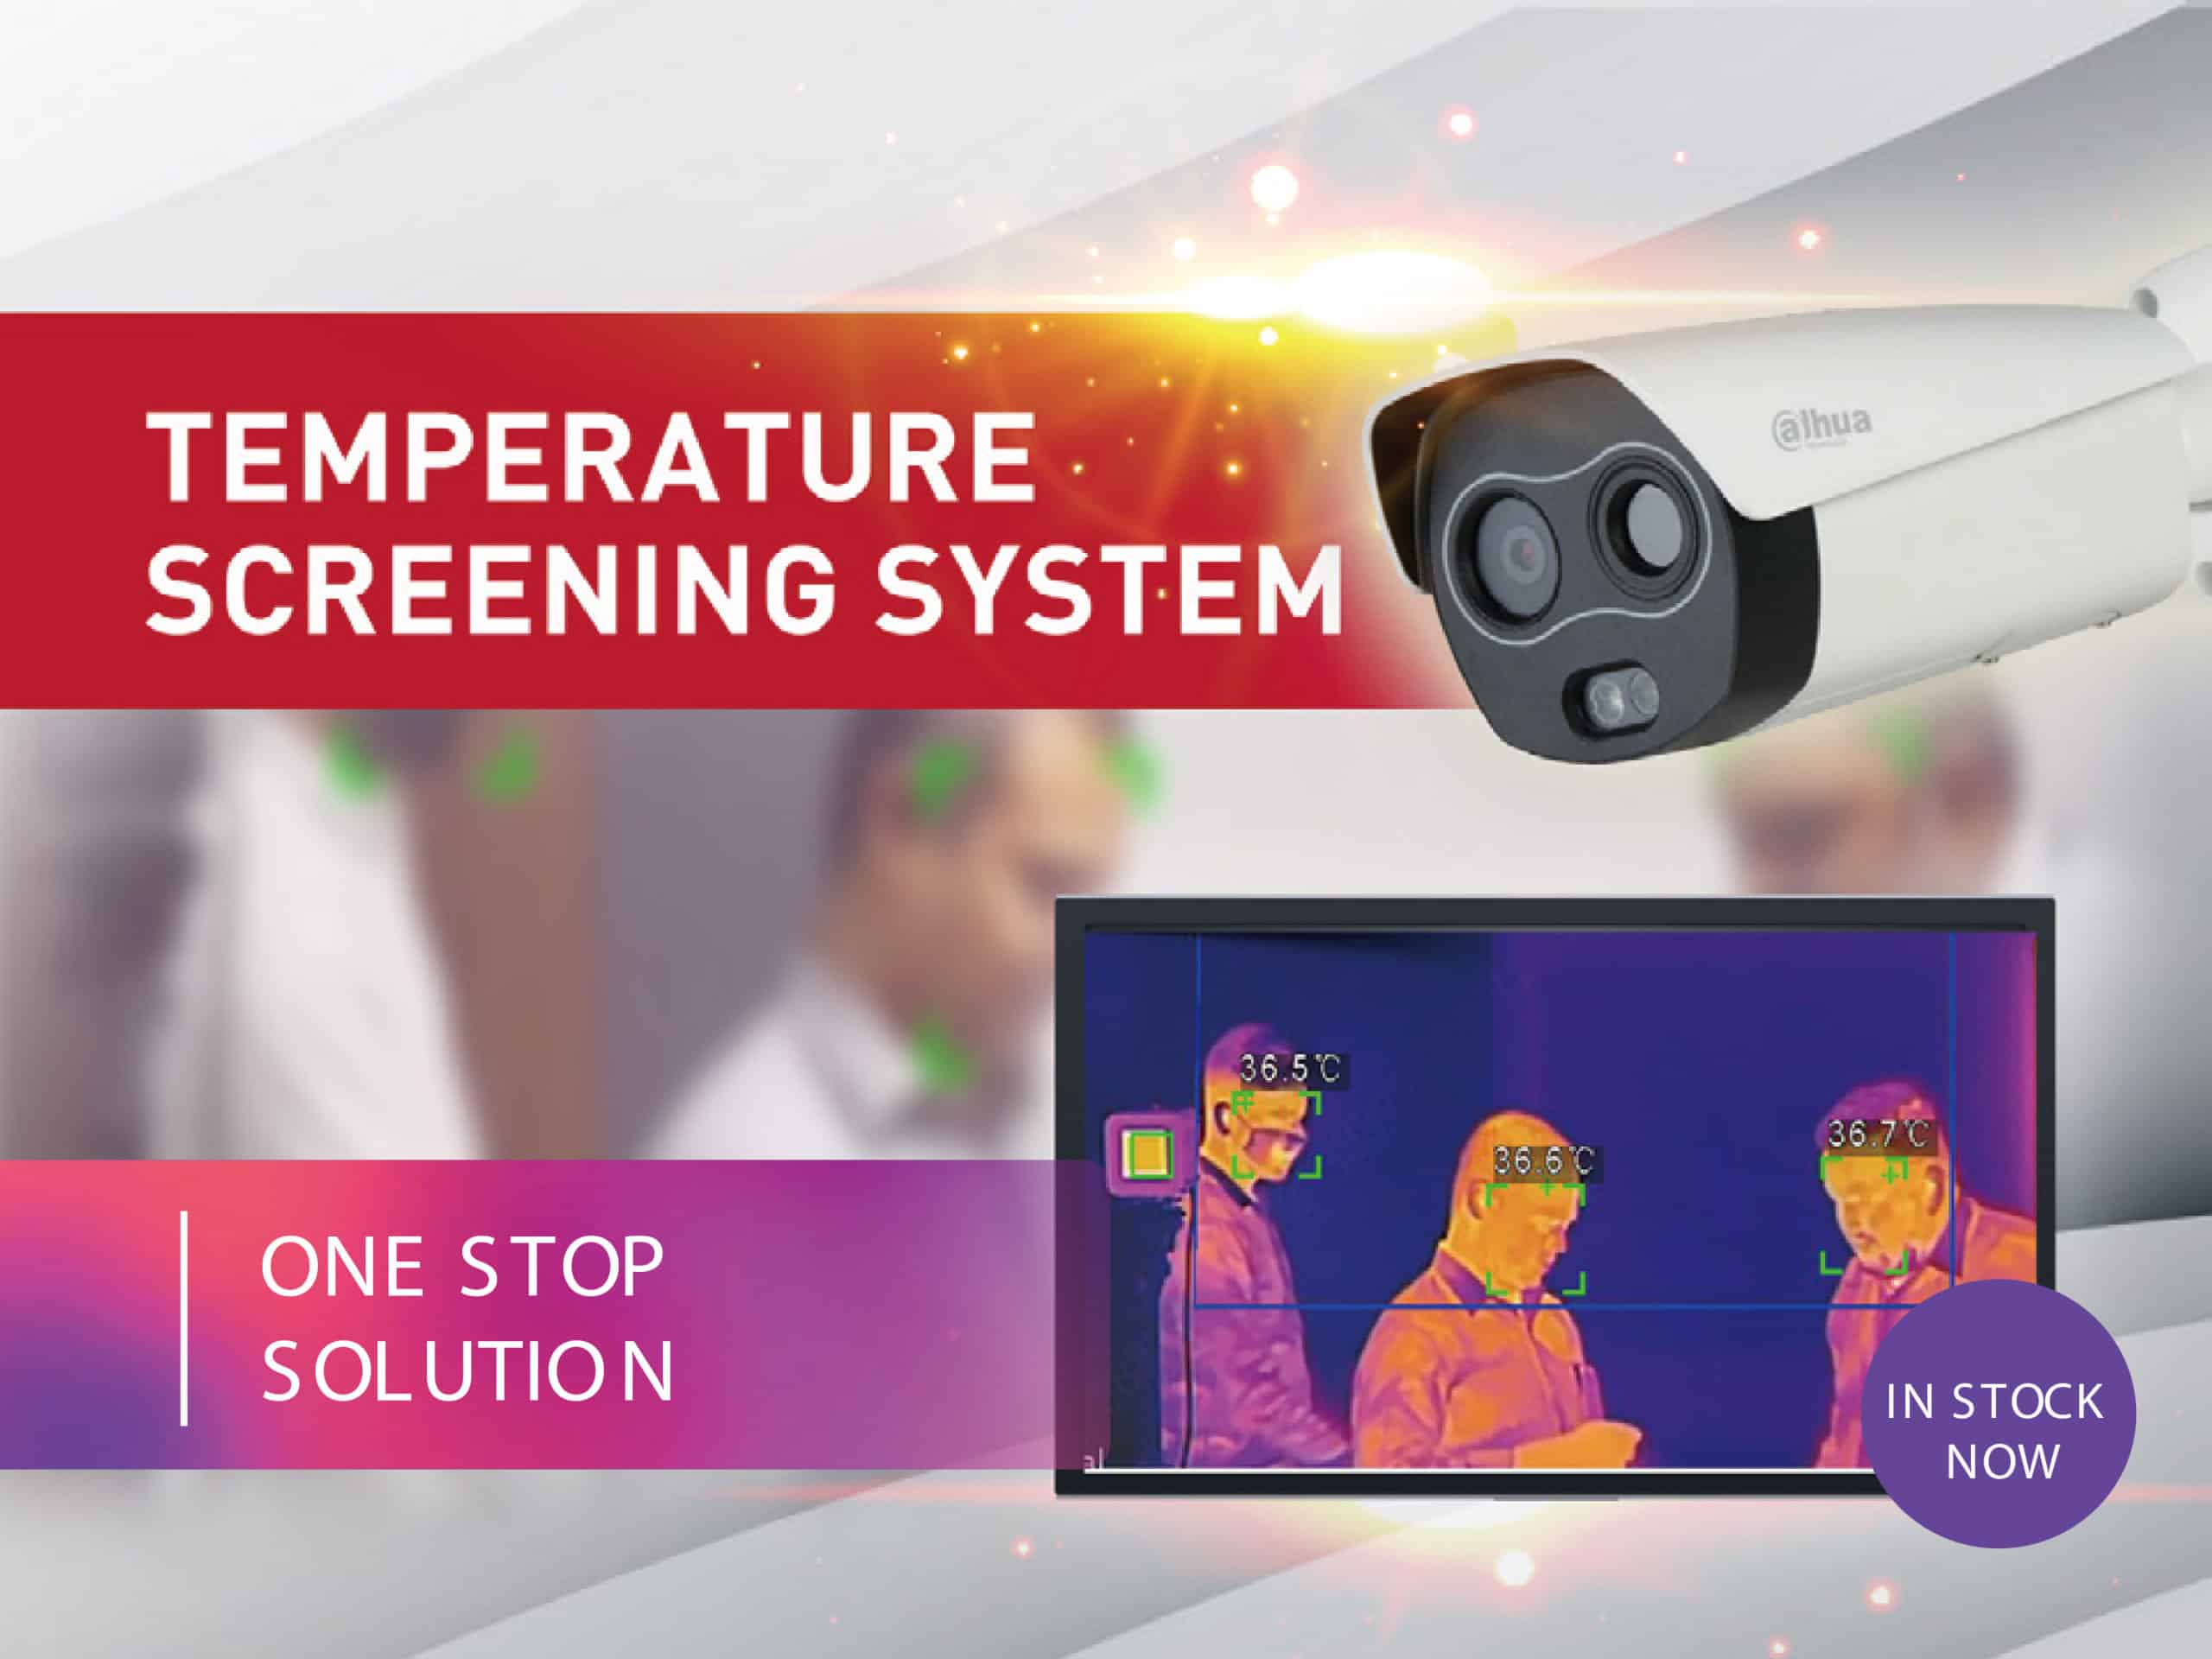 Temperature screening system now available for your business!